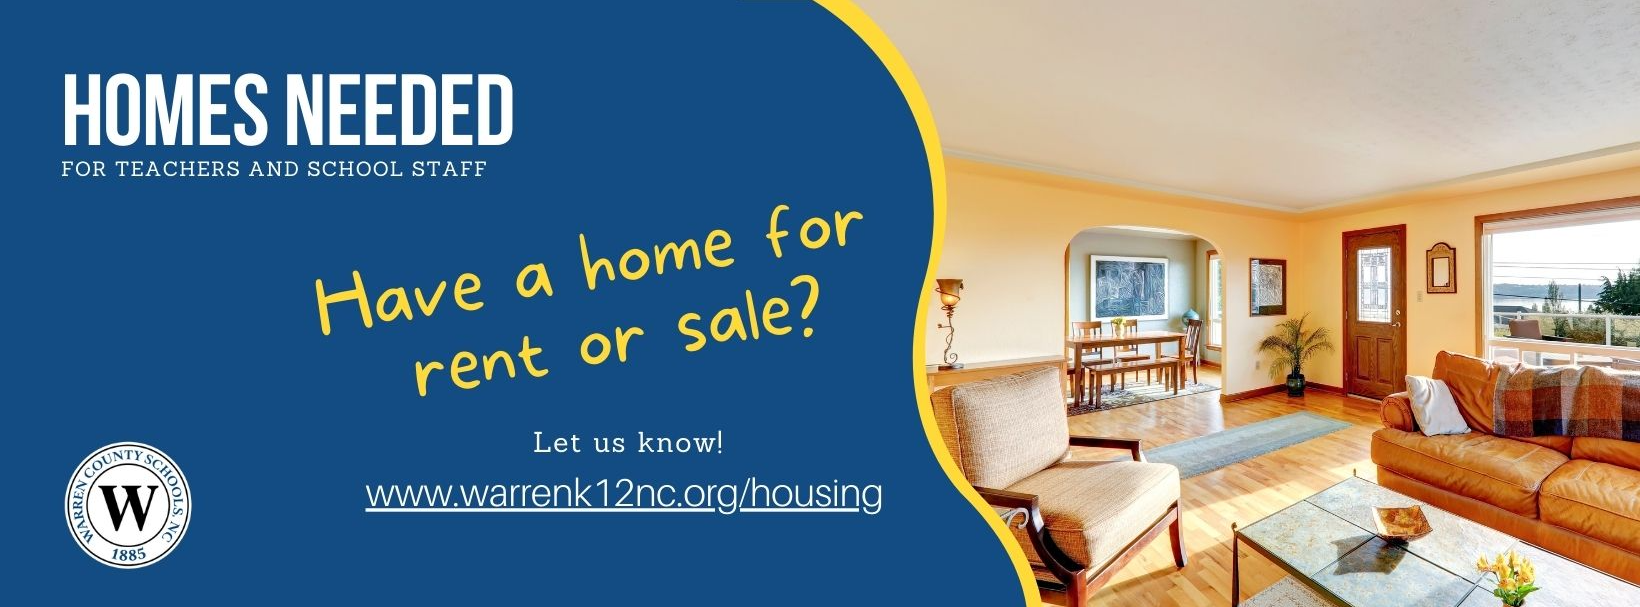 Homes needed for teachers and school staff. Have a home for sale or rent? Let us know! www.warrenk12nc.org/housing